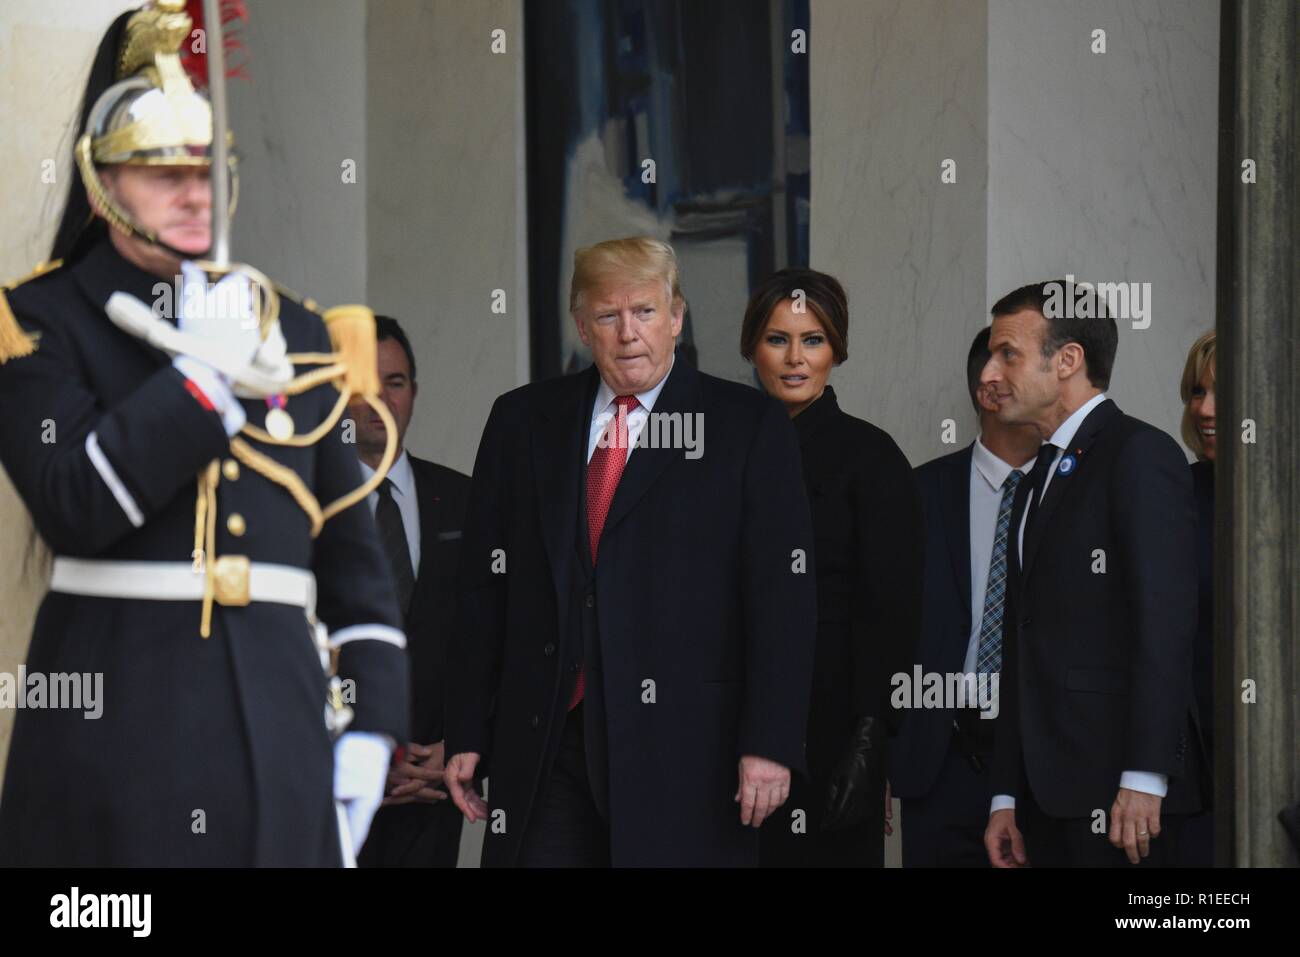 Donald Trump Melania Trump Premiere High Resolution Stock Photography and  Images - Alamy